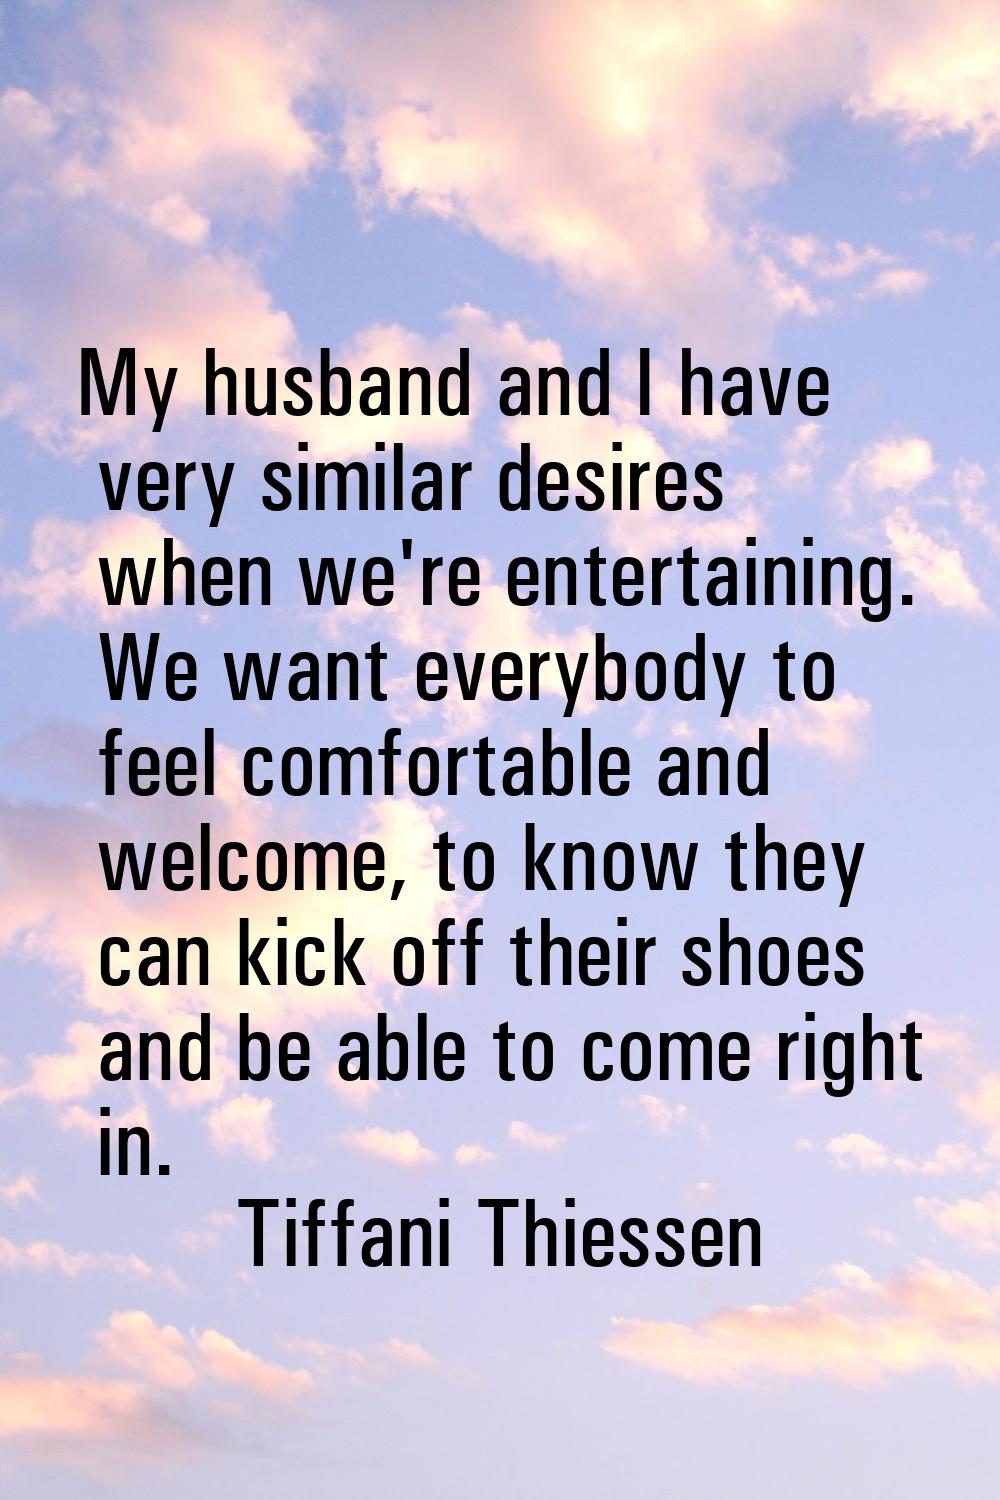 My husband and I have very similar desires when we're entertaining. We want everybody to feel comfo